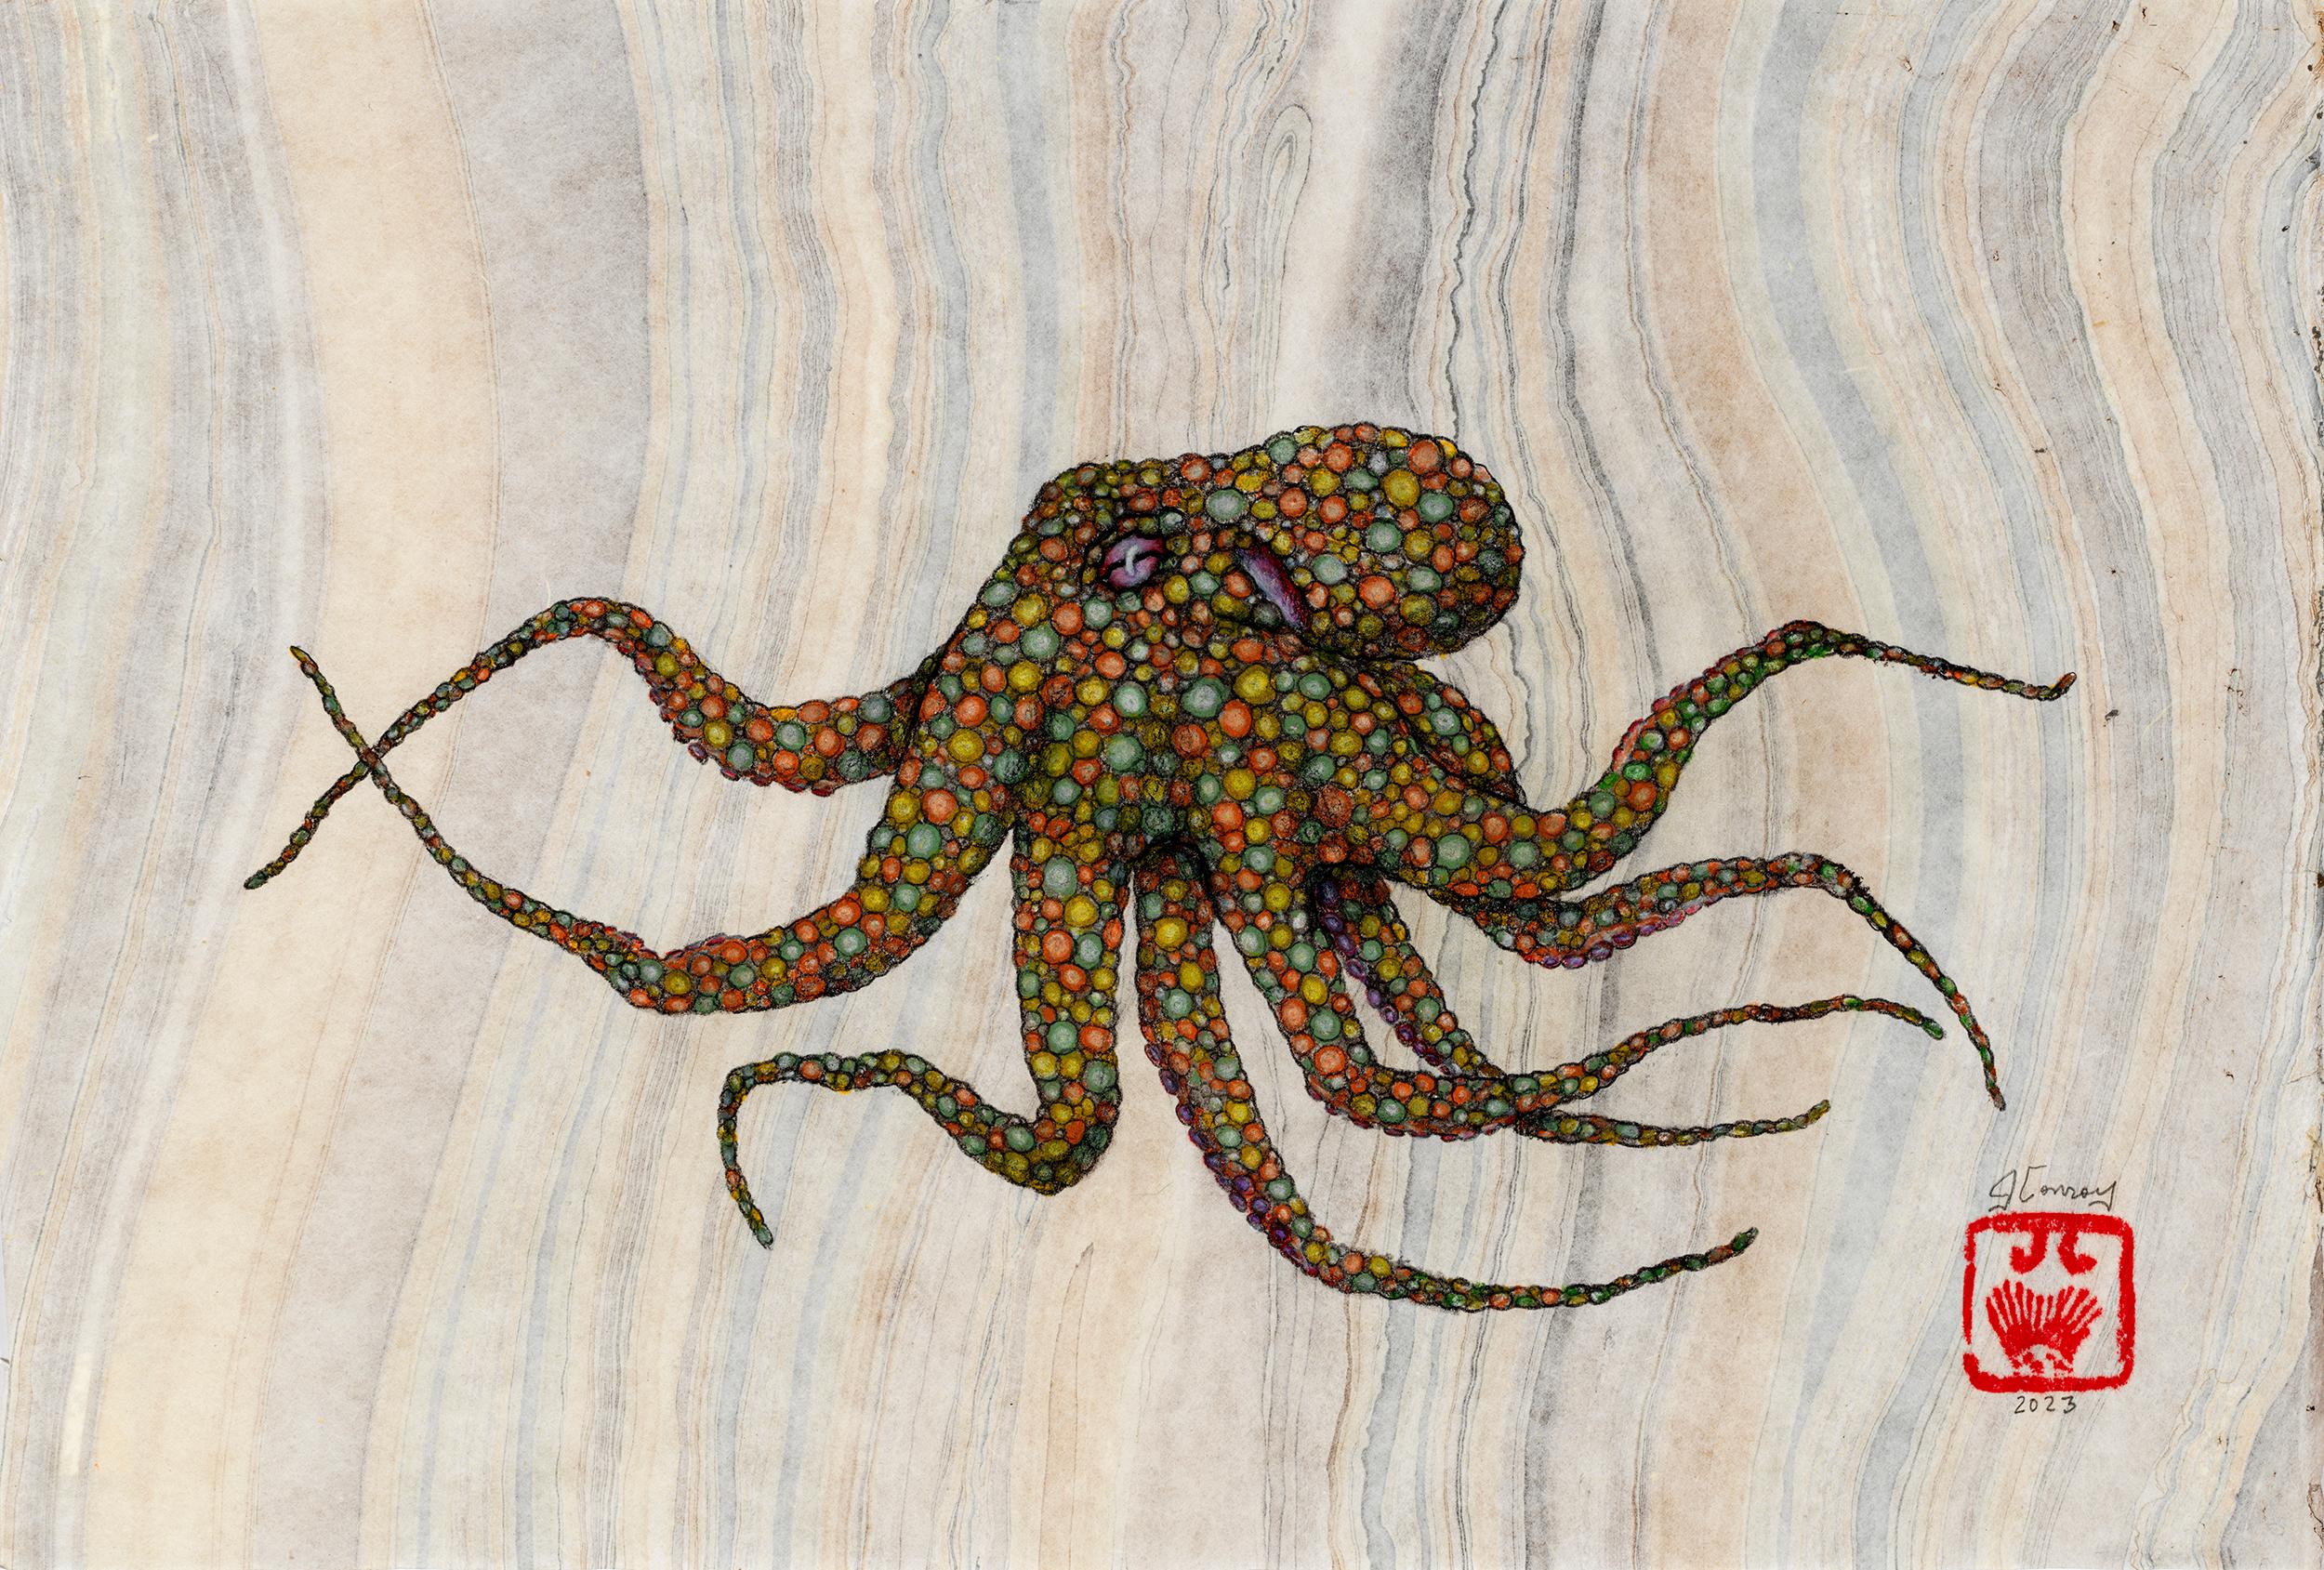 70's Kitchen - Gyotaku Style Sumi Ink Painting of an Octopus on Mulberry Paper